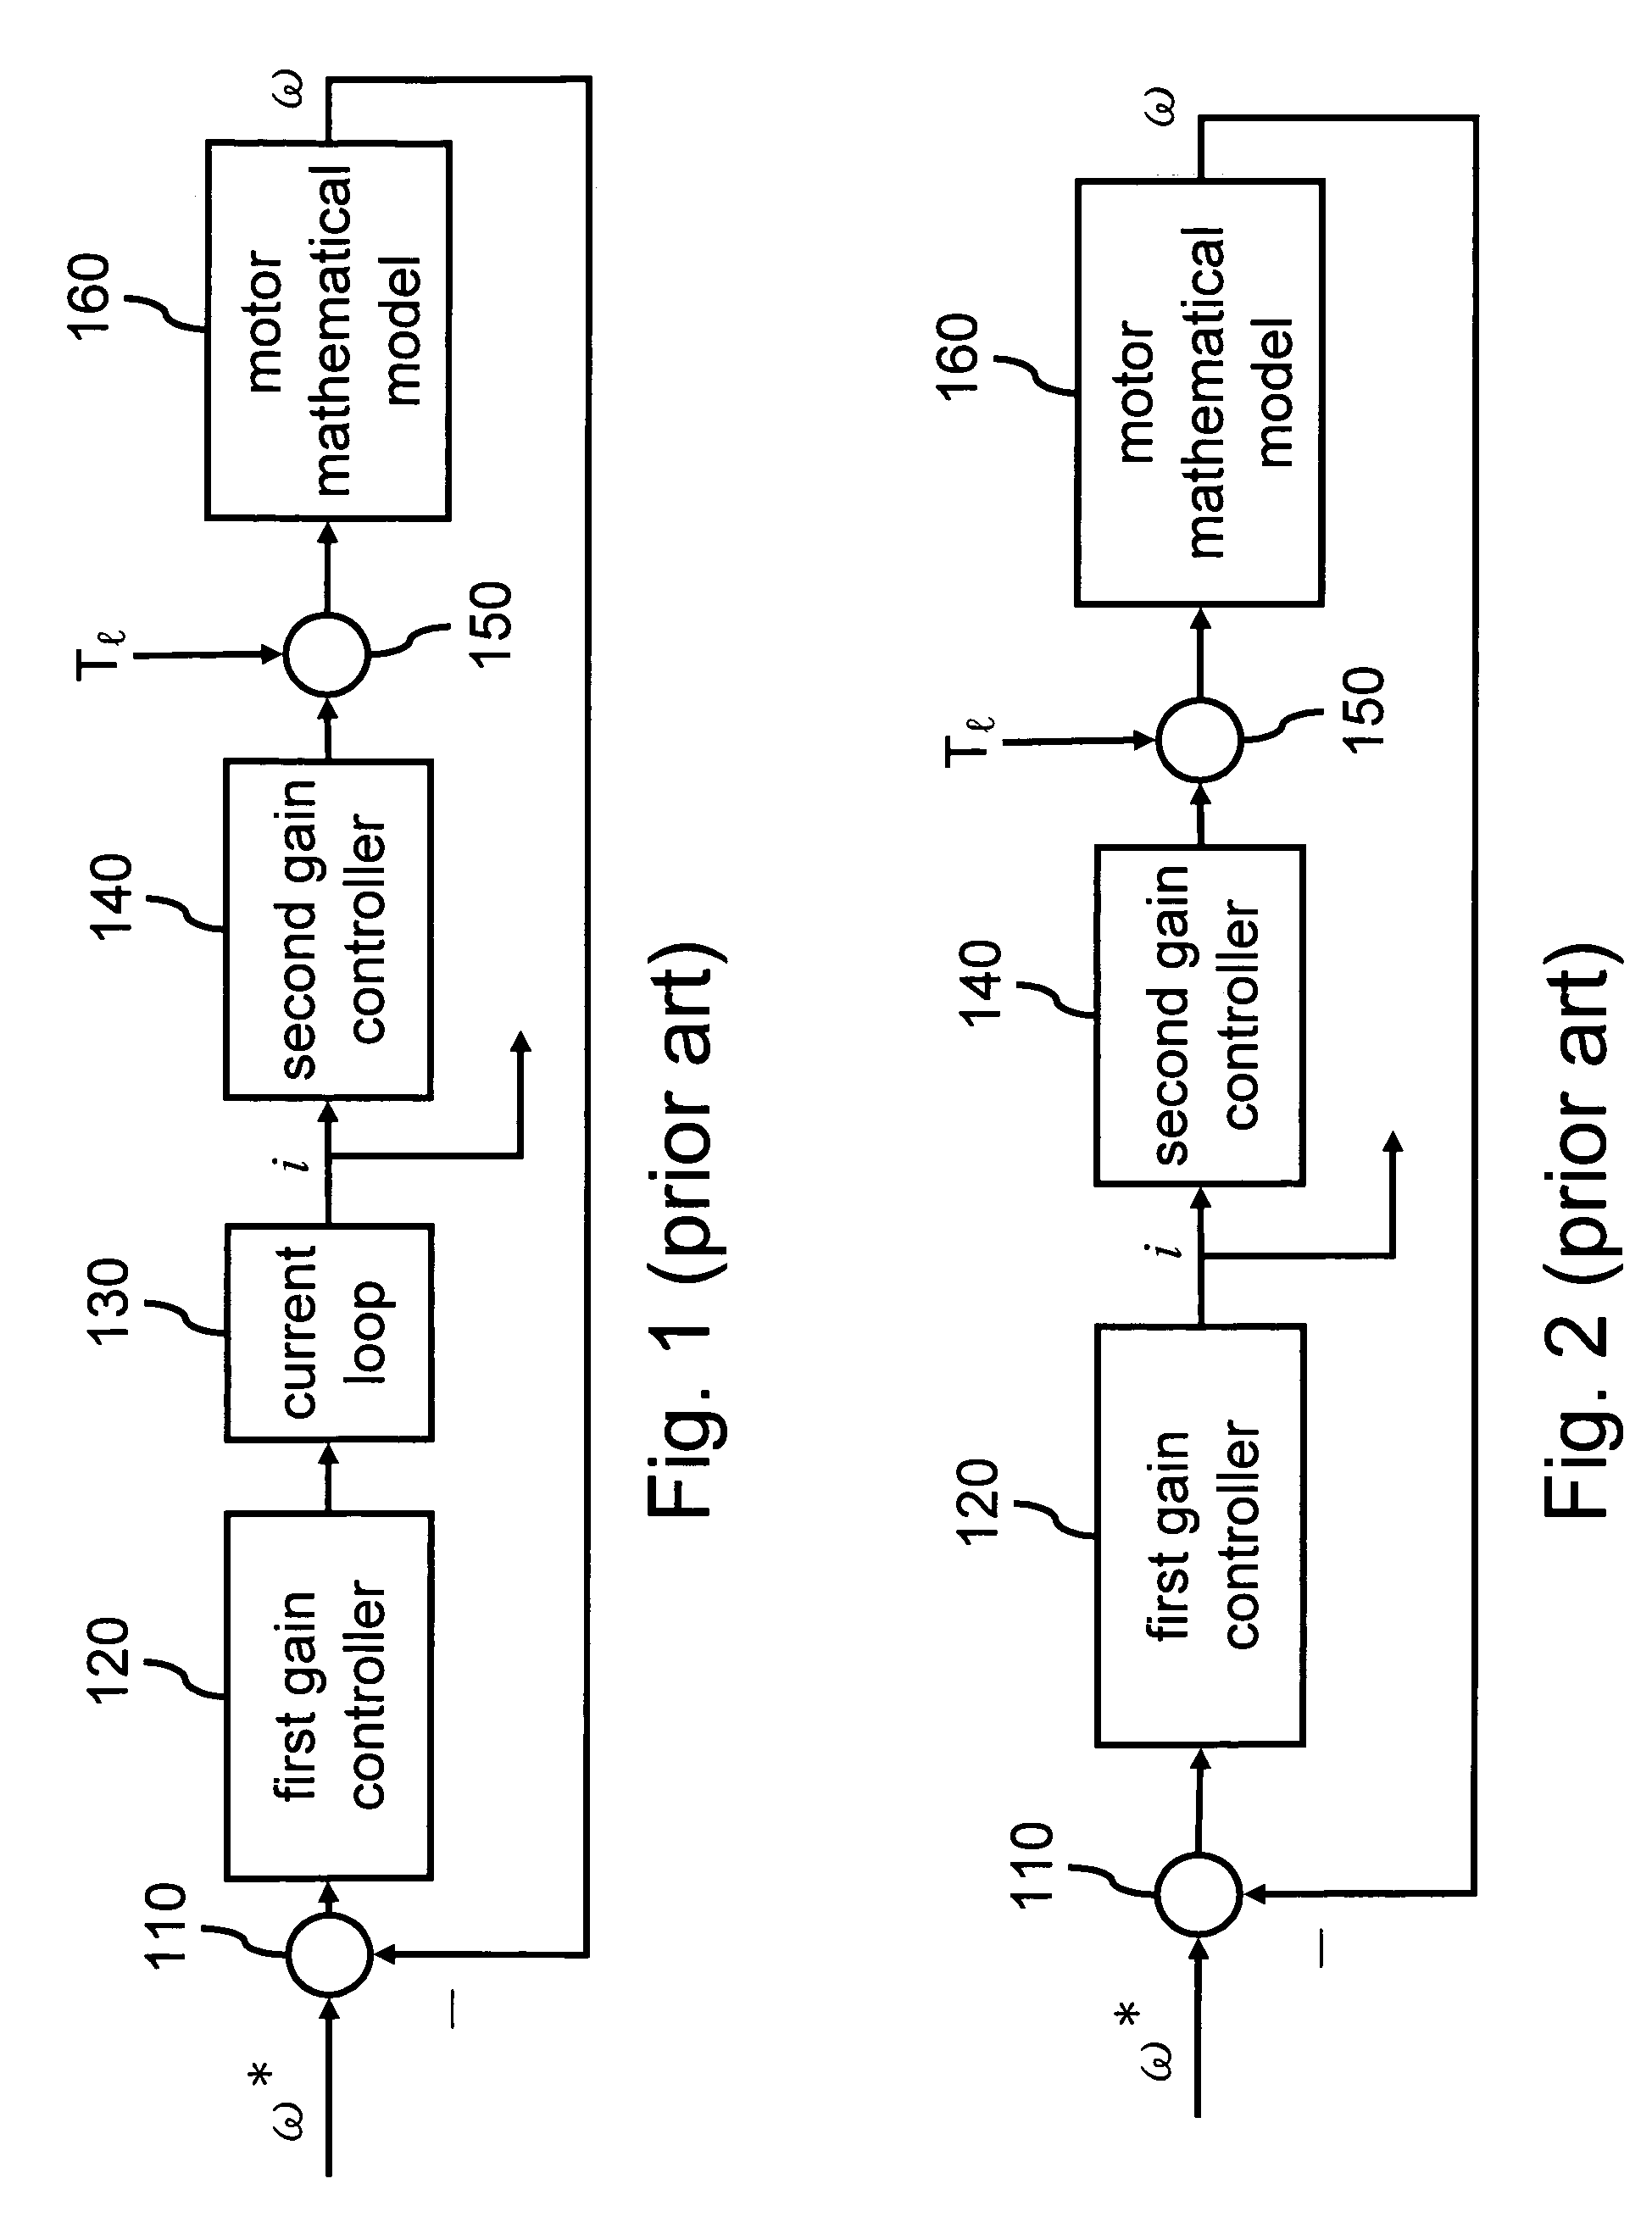 Method for estimating load inertia and a system for controlling motor speed using inverse model